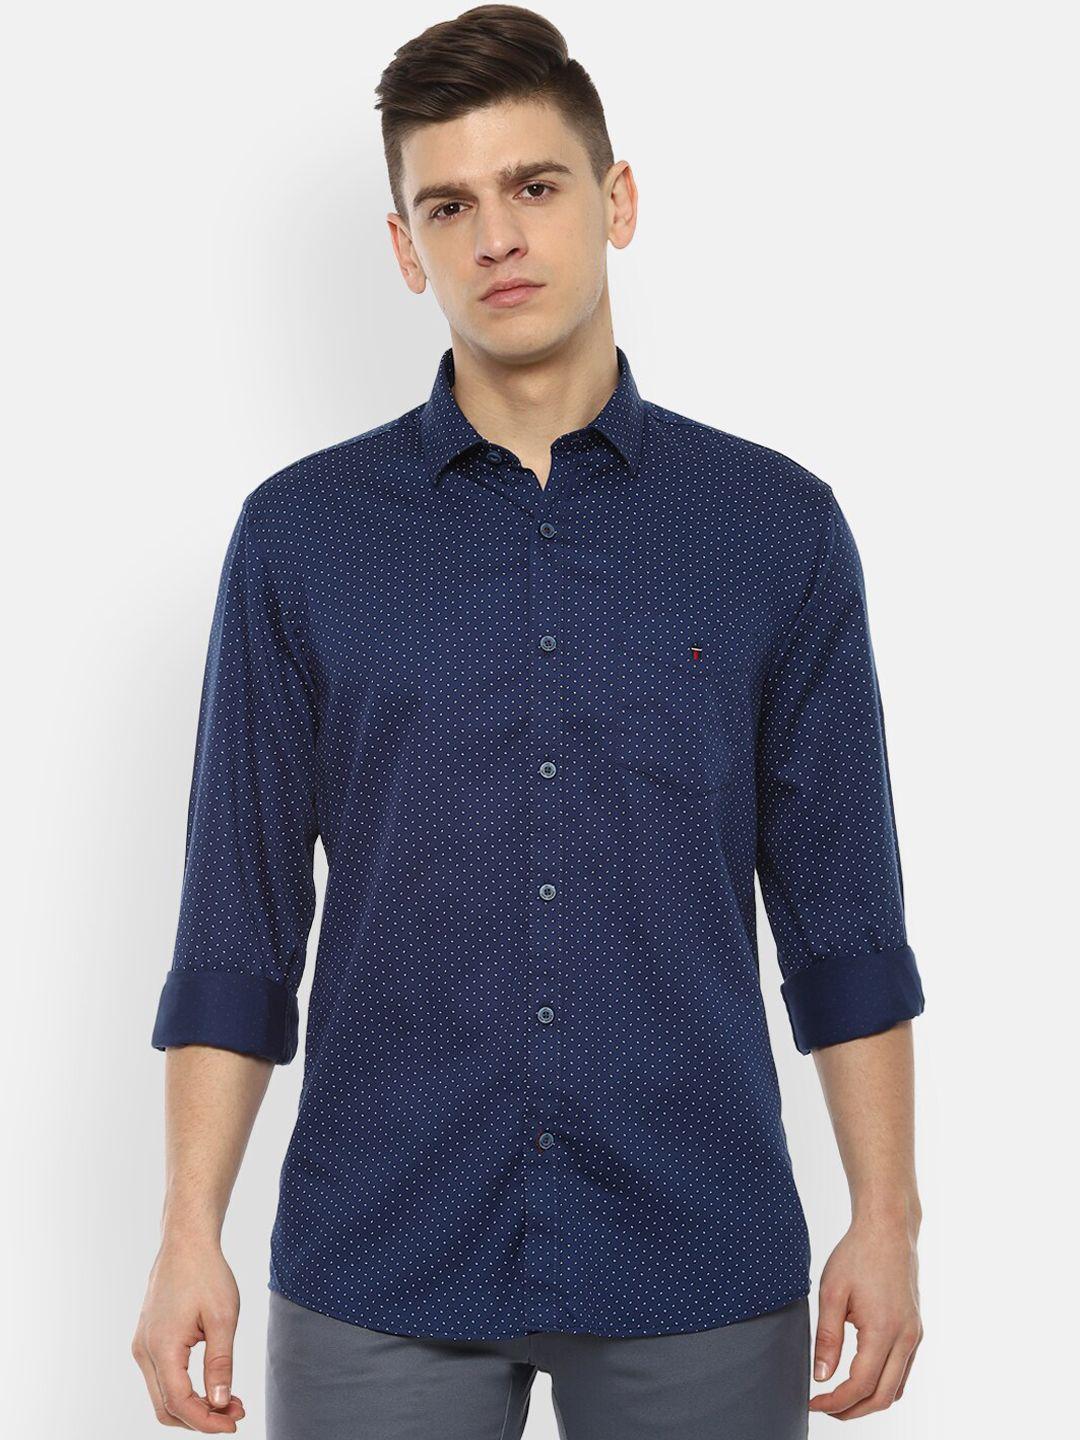 louis philippe sport men navy blue slim fit opaque printed casual shirt